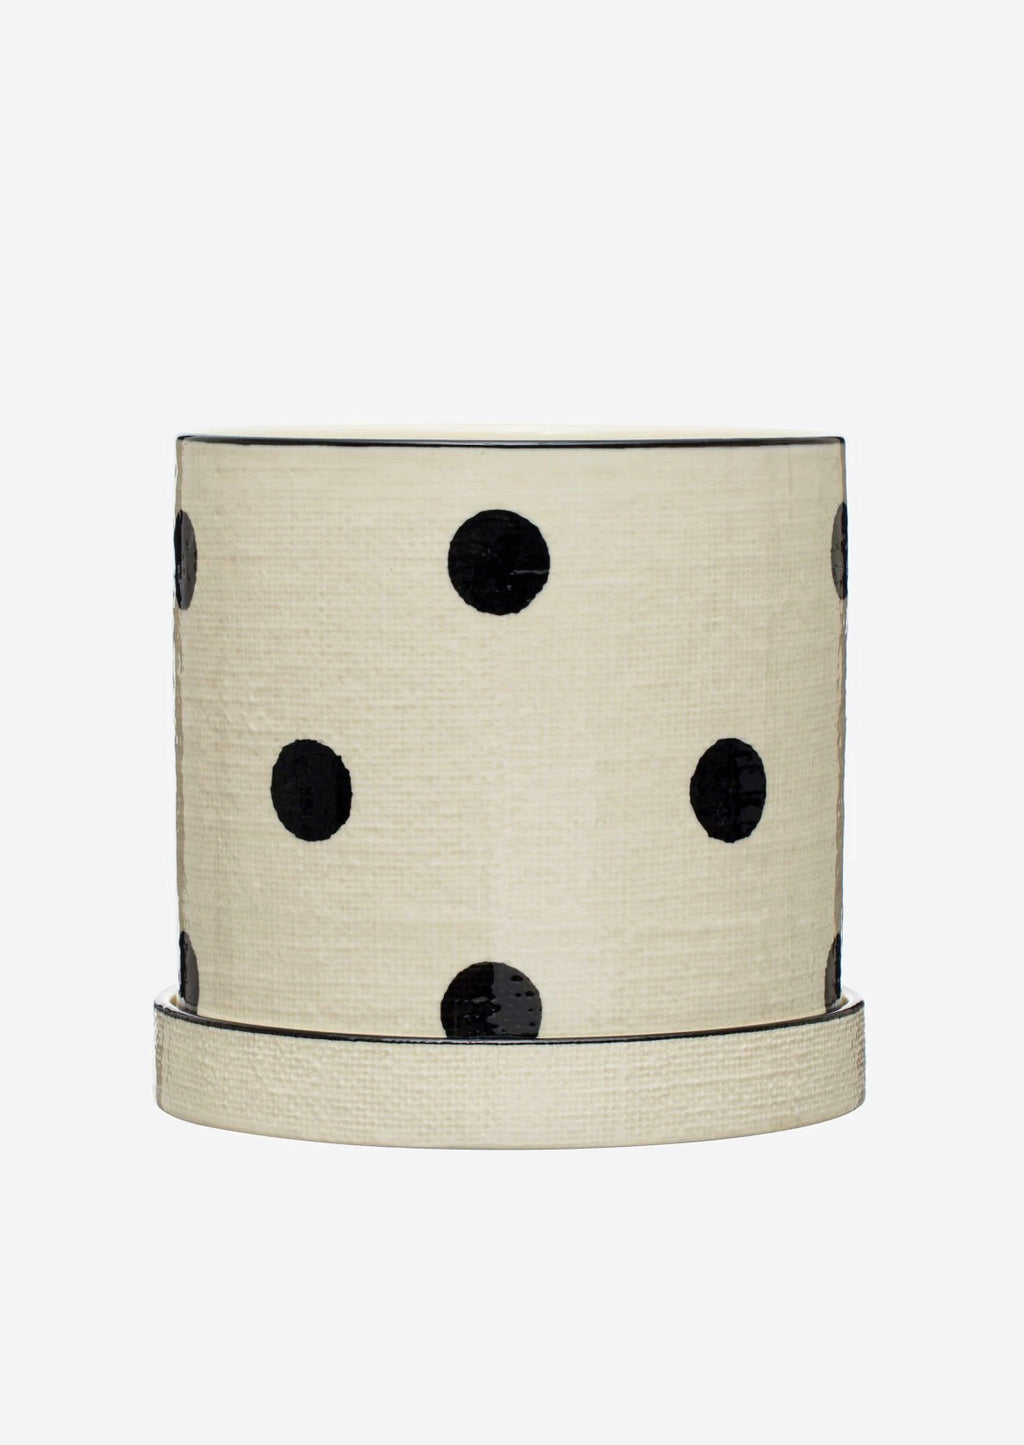 2: A polka dot ceramic planter in white with black dots, linen texture.